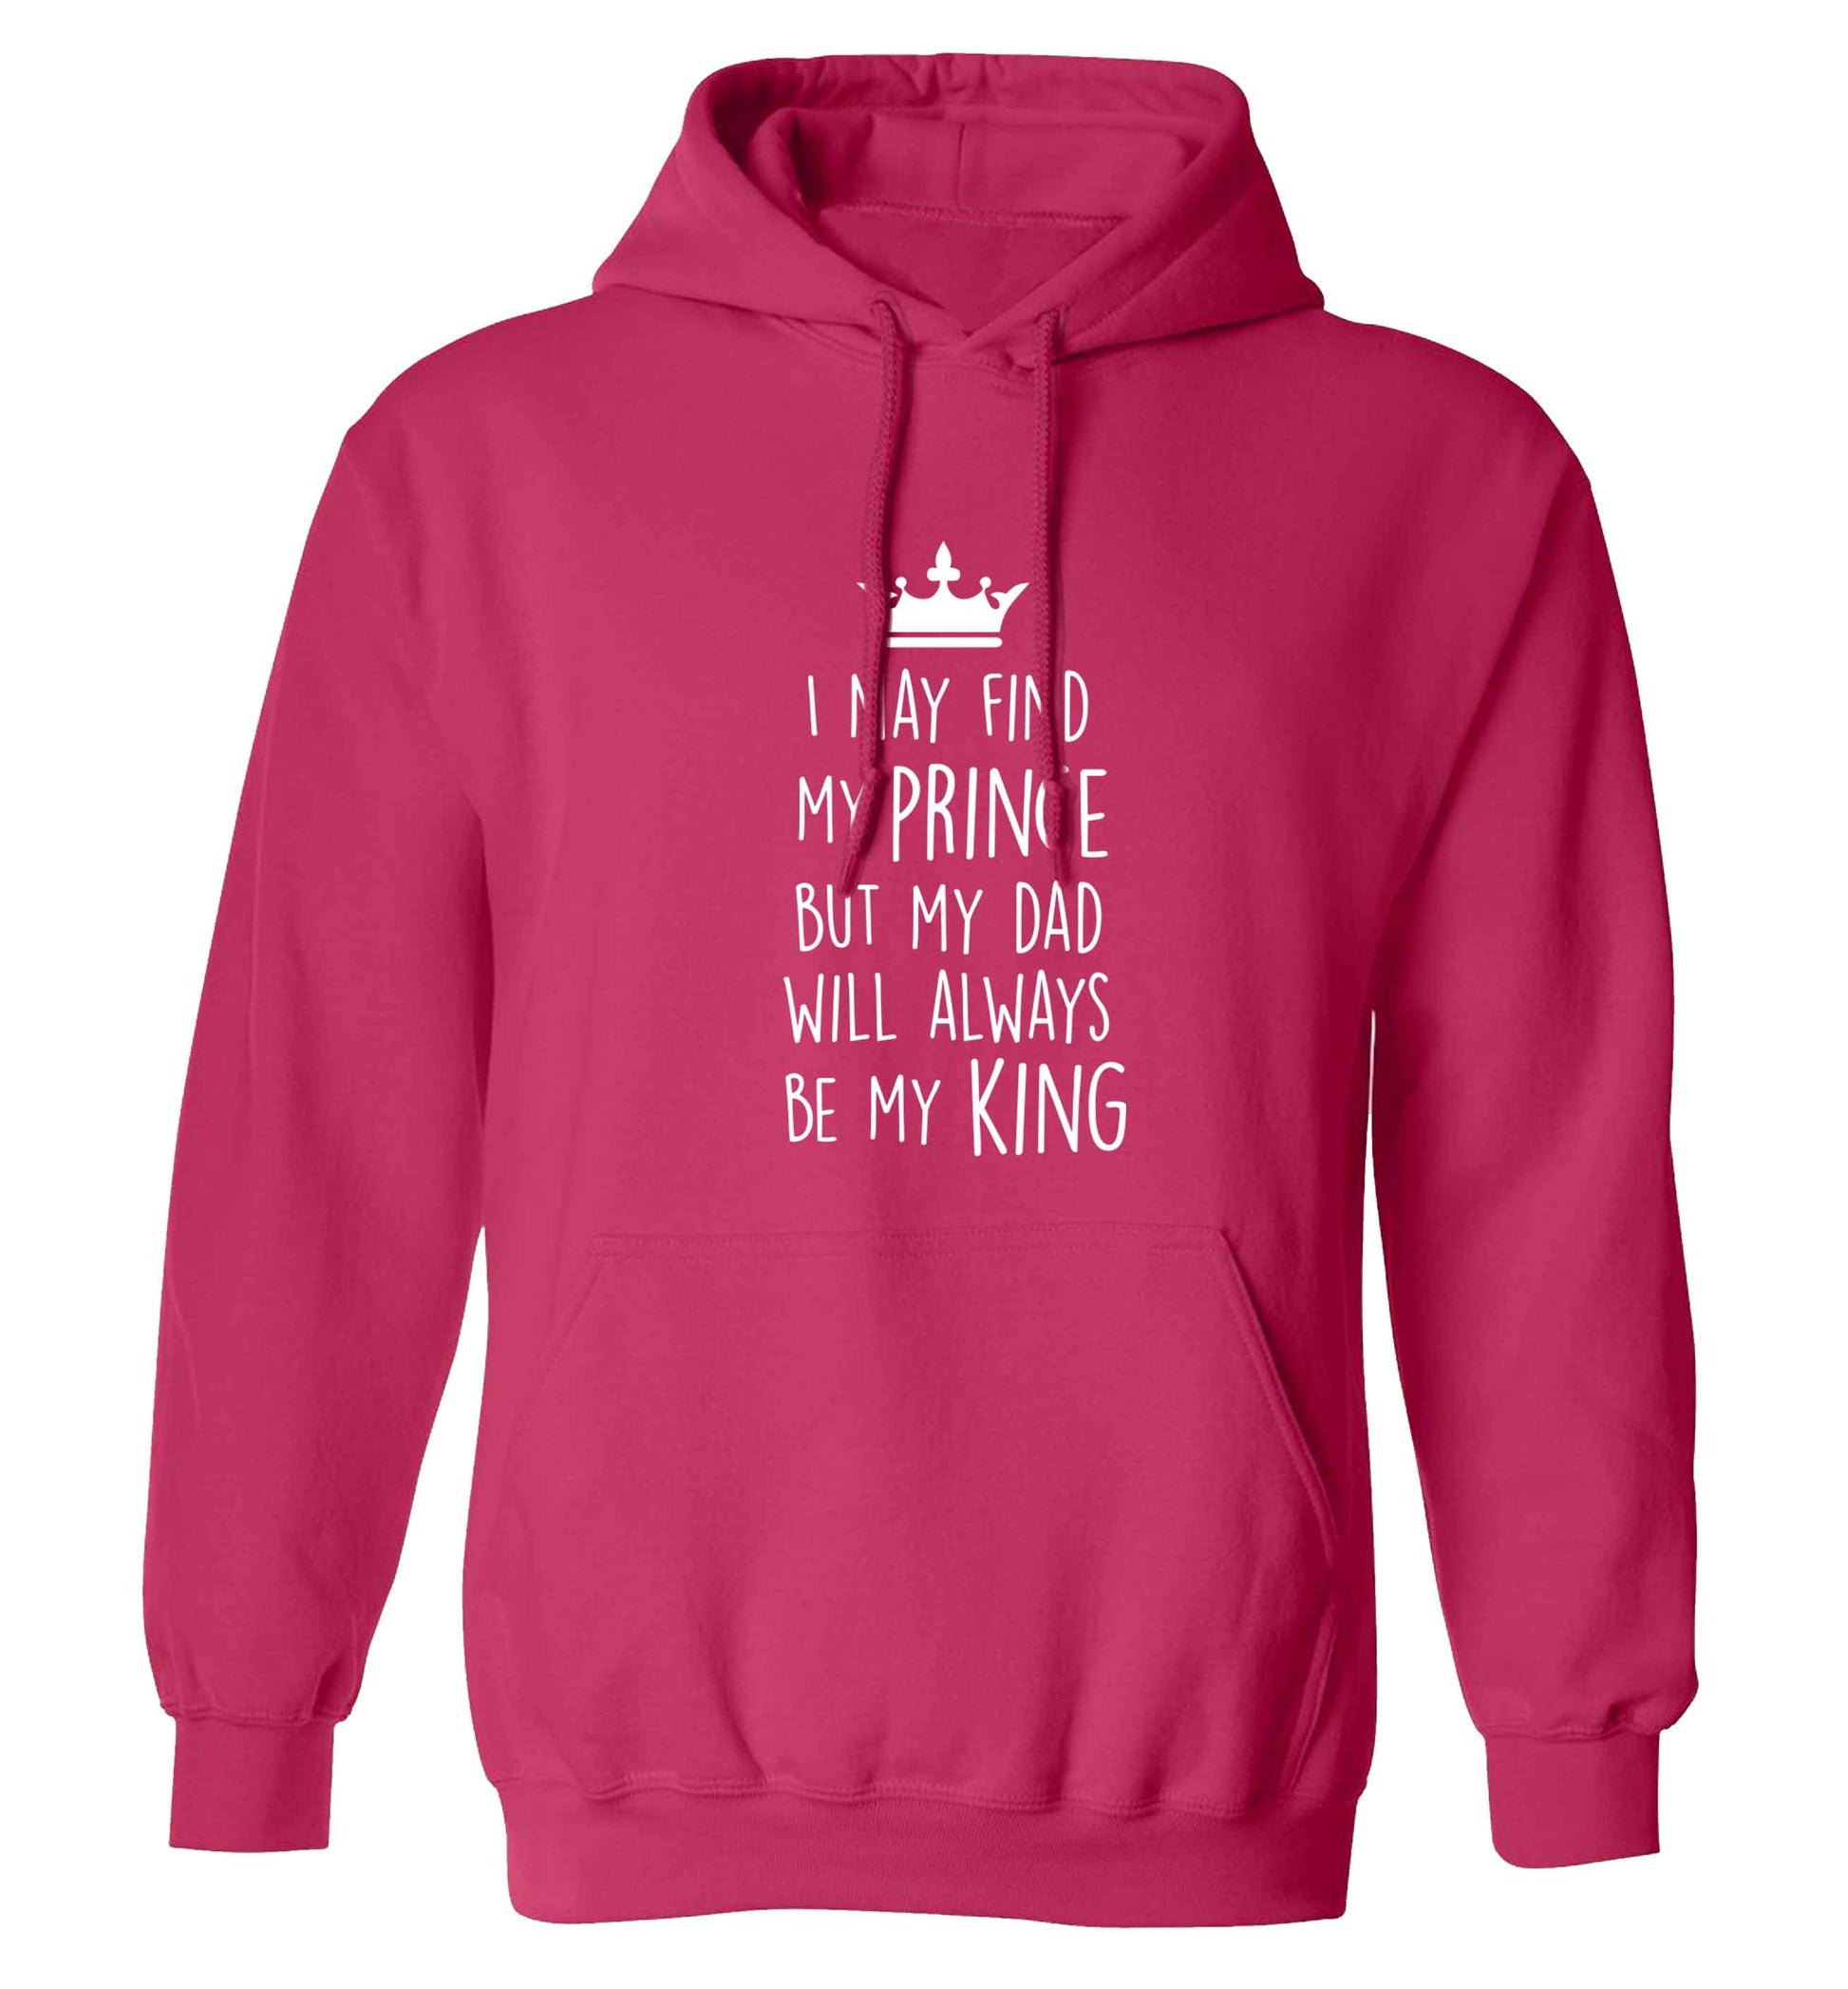 I may find my prince but my dad will always be my king adults unisex pink hoodie 2XL